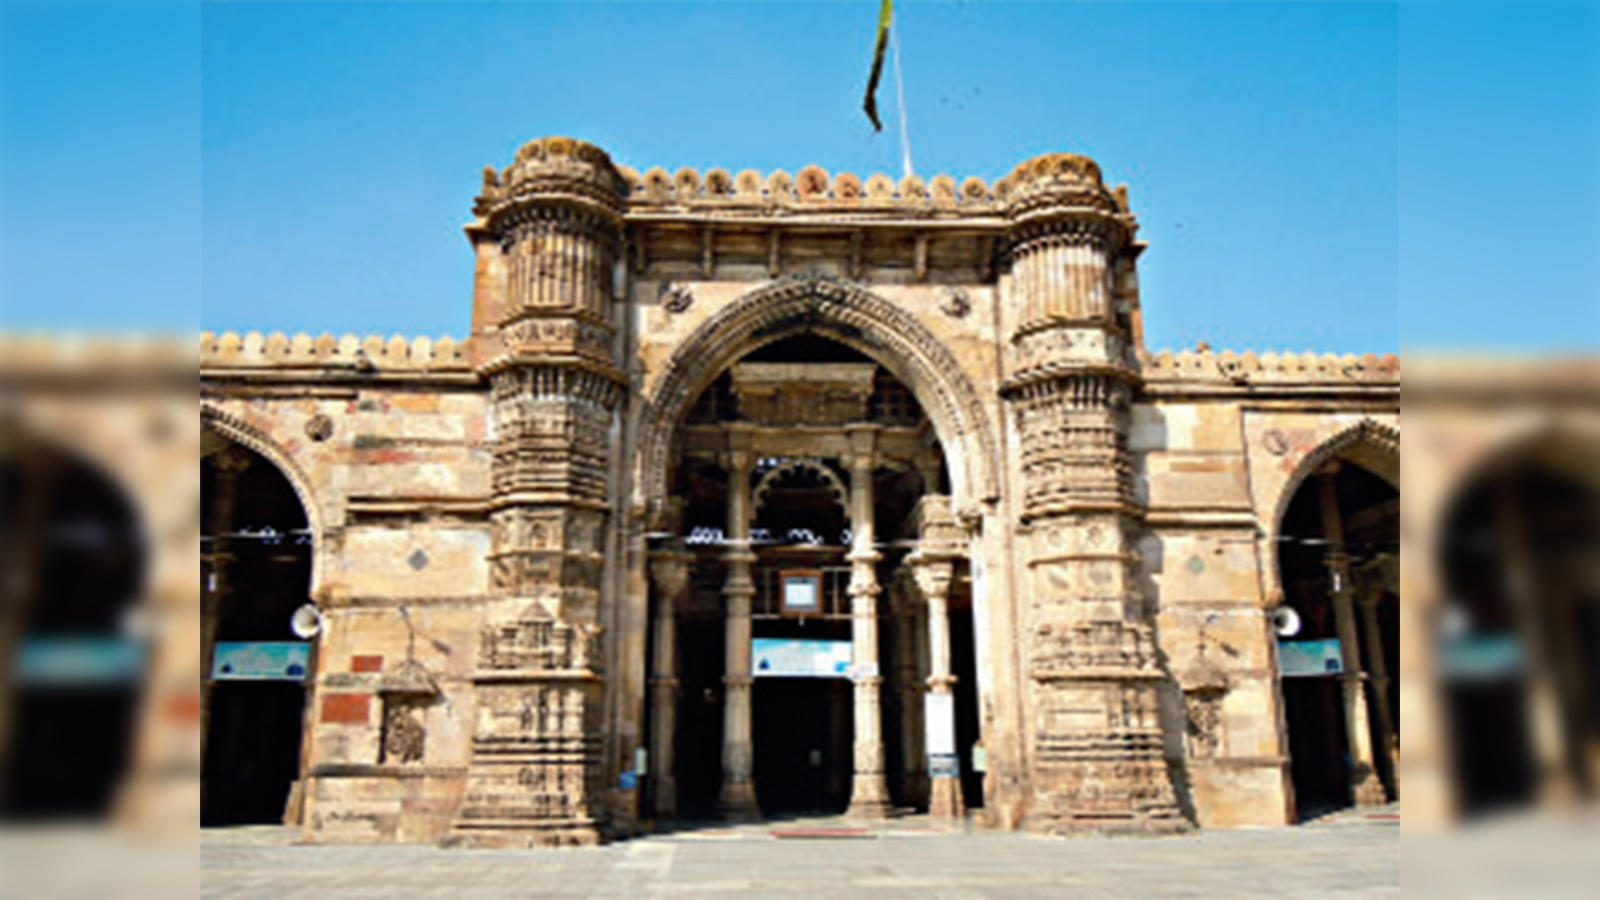 Ahmedabad: Gujarat's World Heritage City and Cultural Hub - Life in the Walled City of Ahmedabad